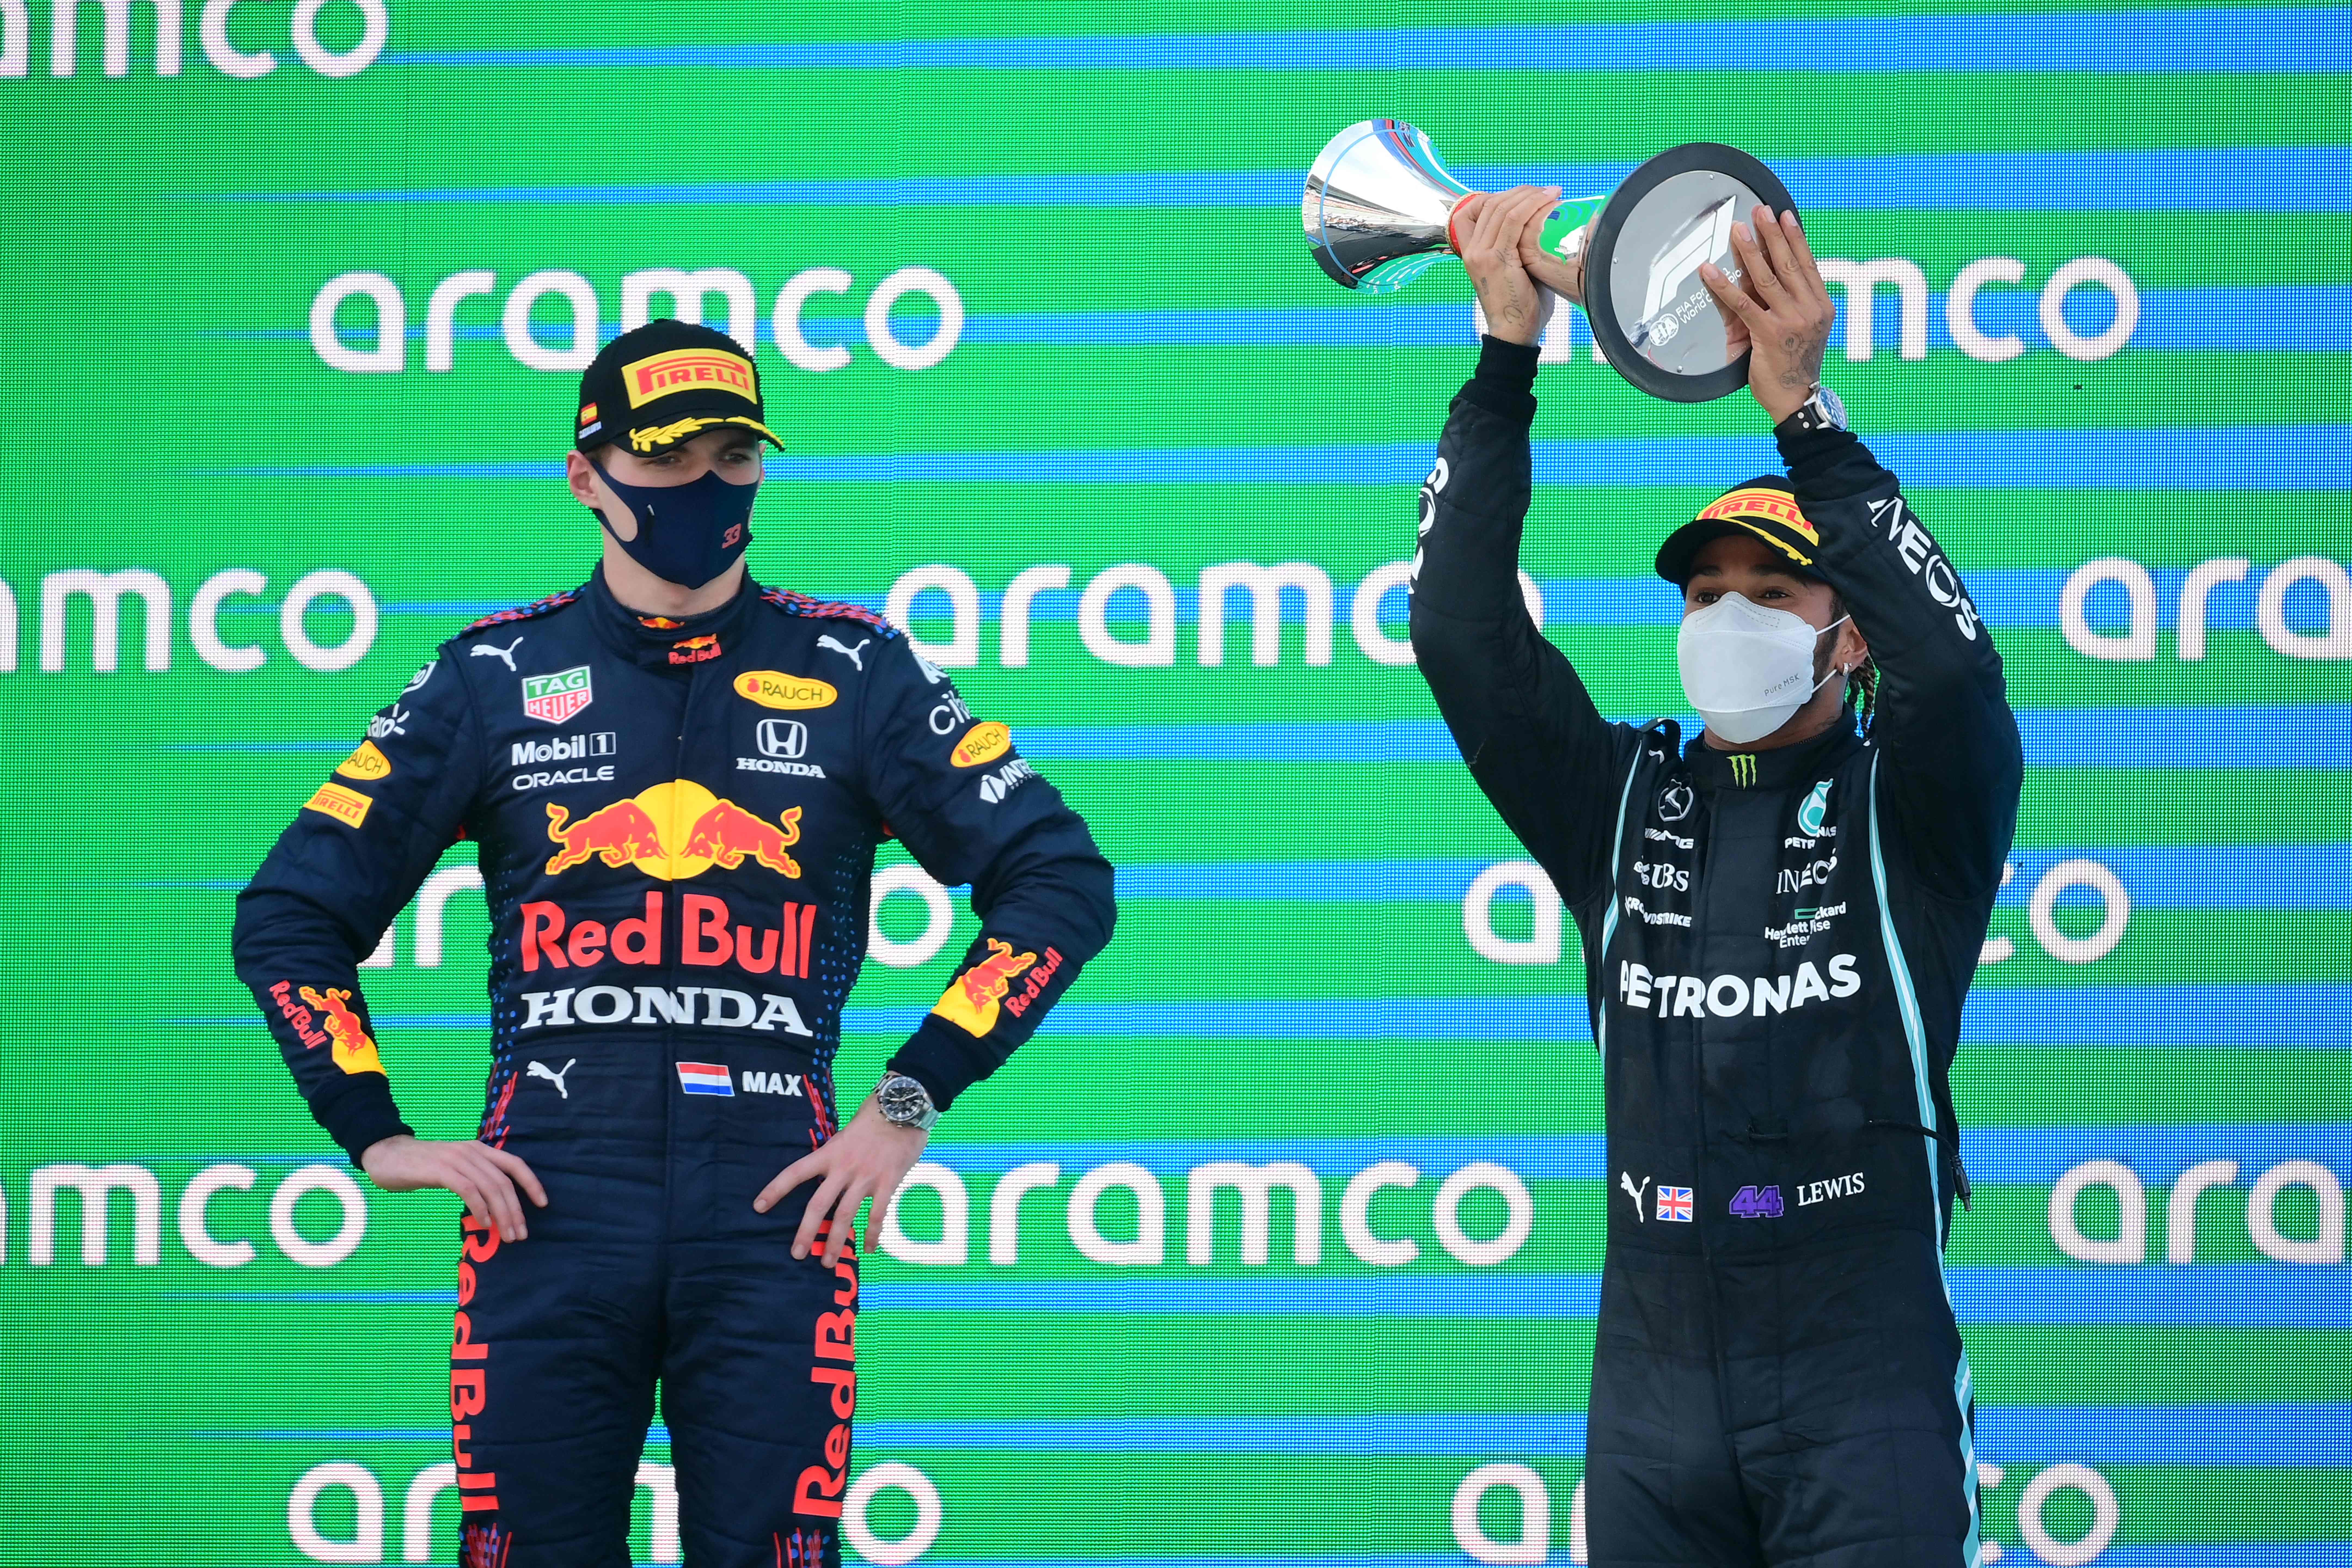 Max Verstappen has seen title rival Lewis Hamilton win the past three races of the season